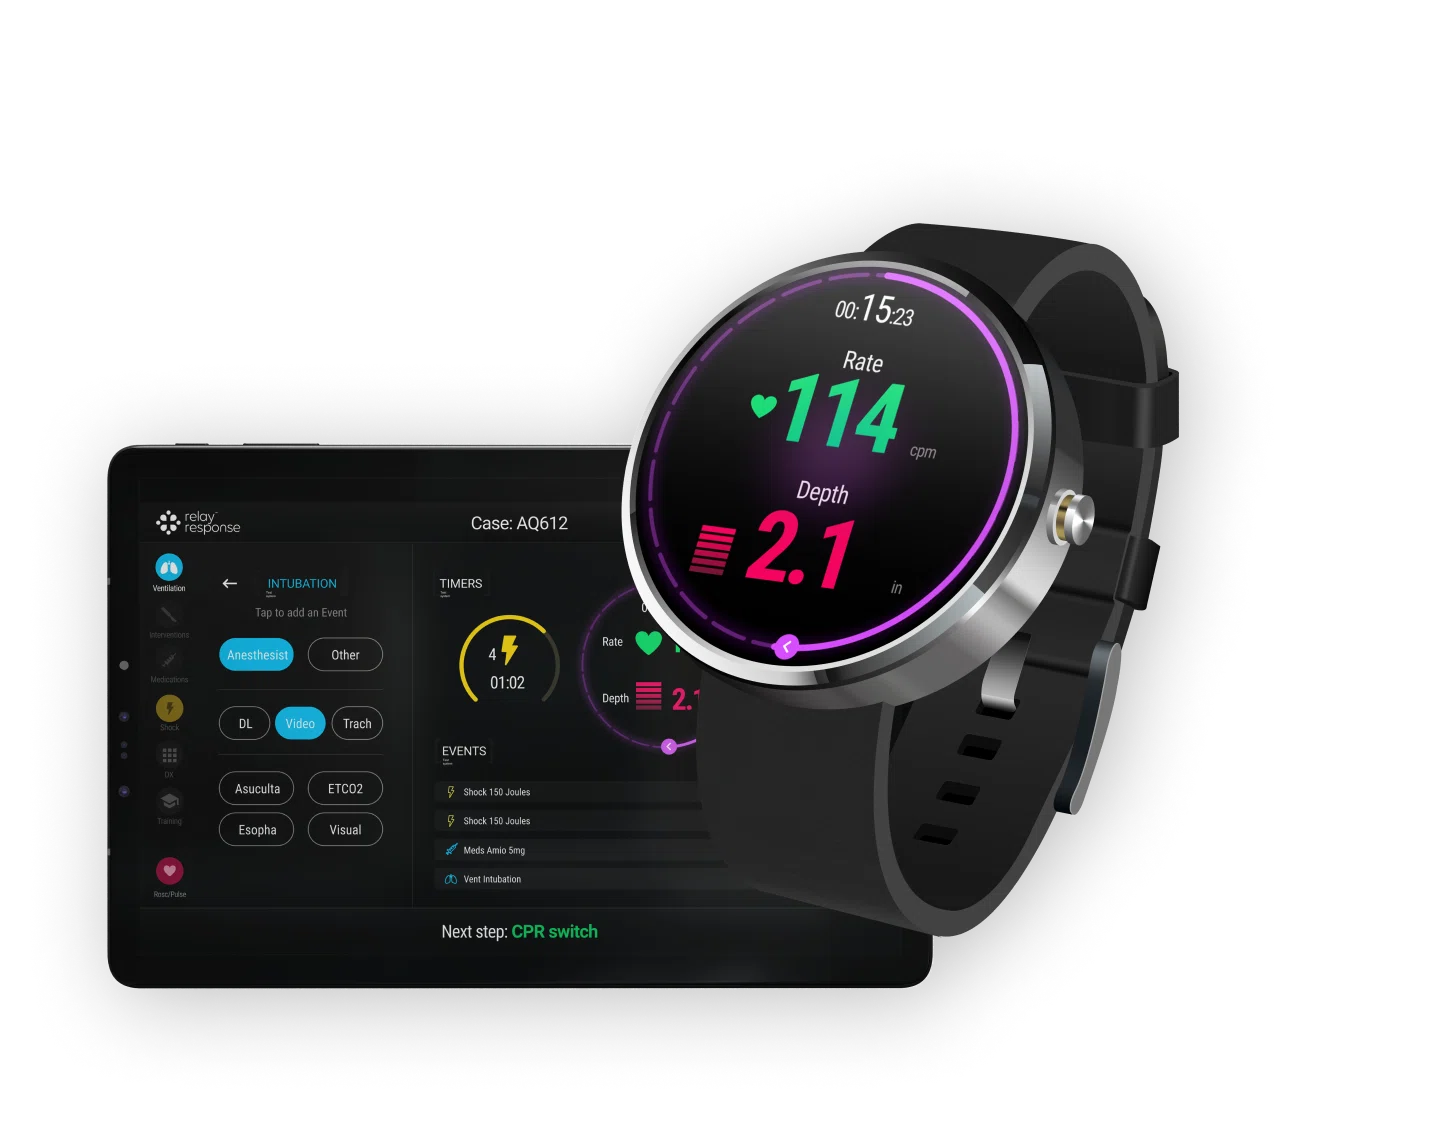 Relay response app on a tablet and smartwatch